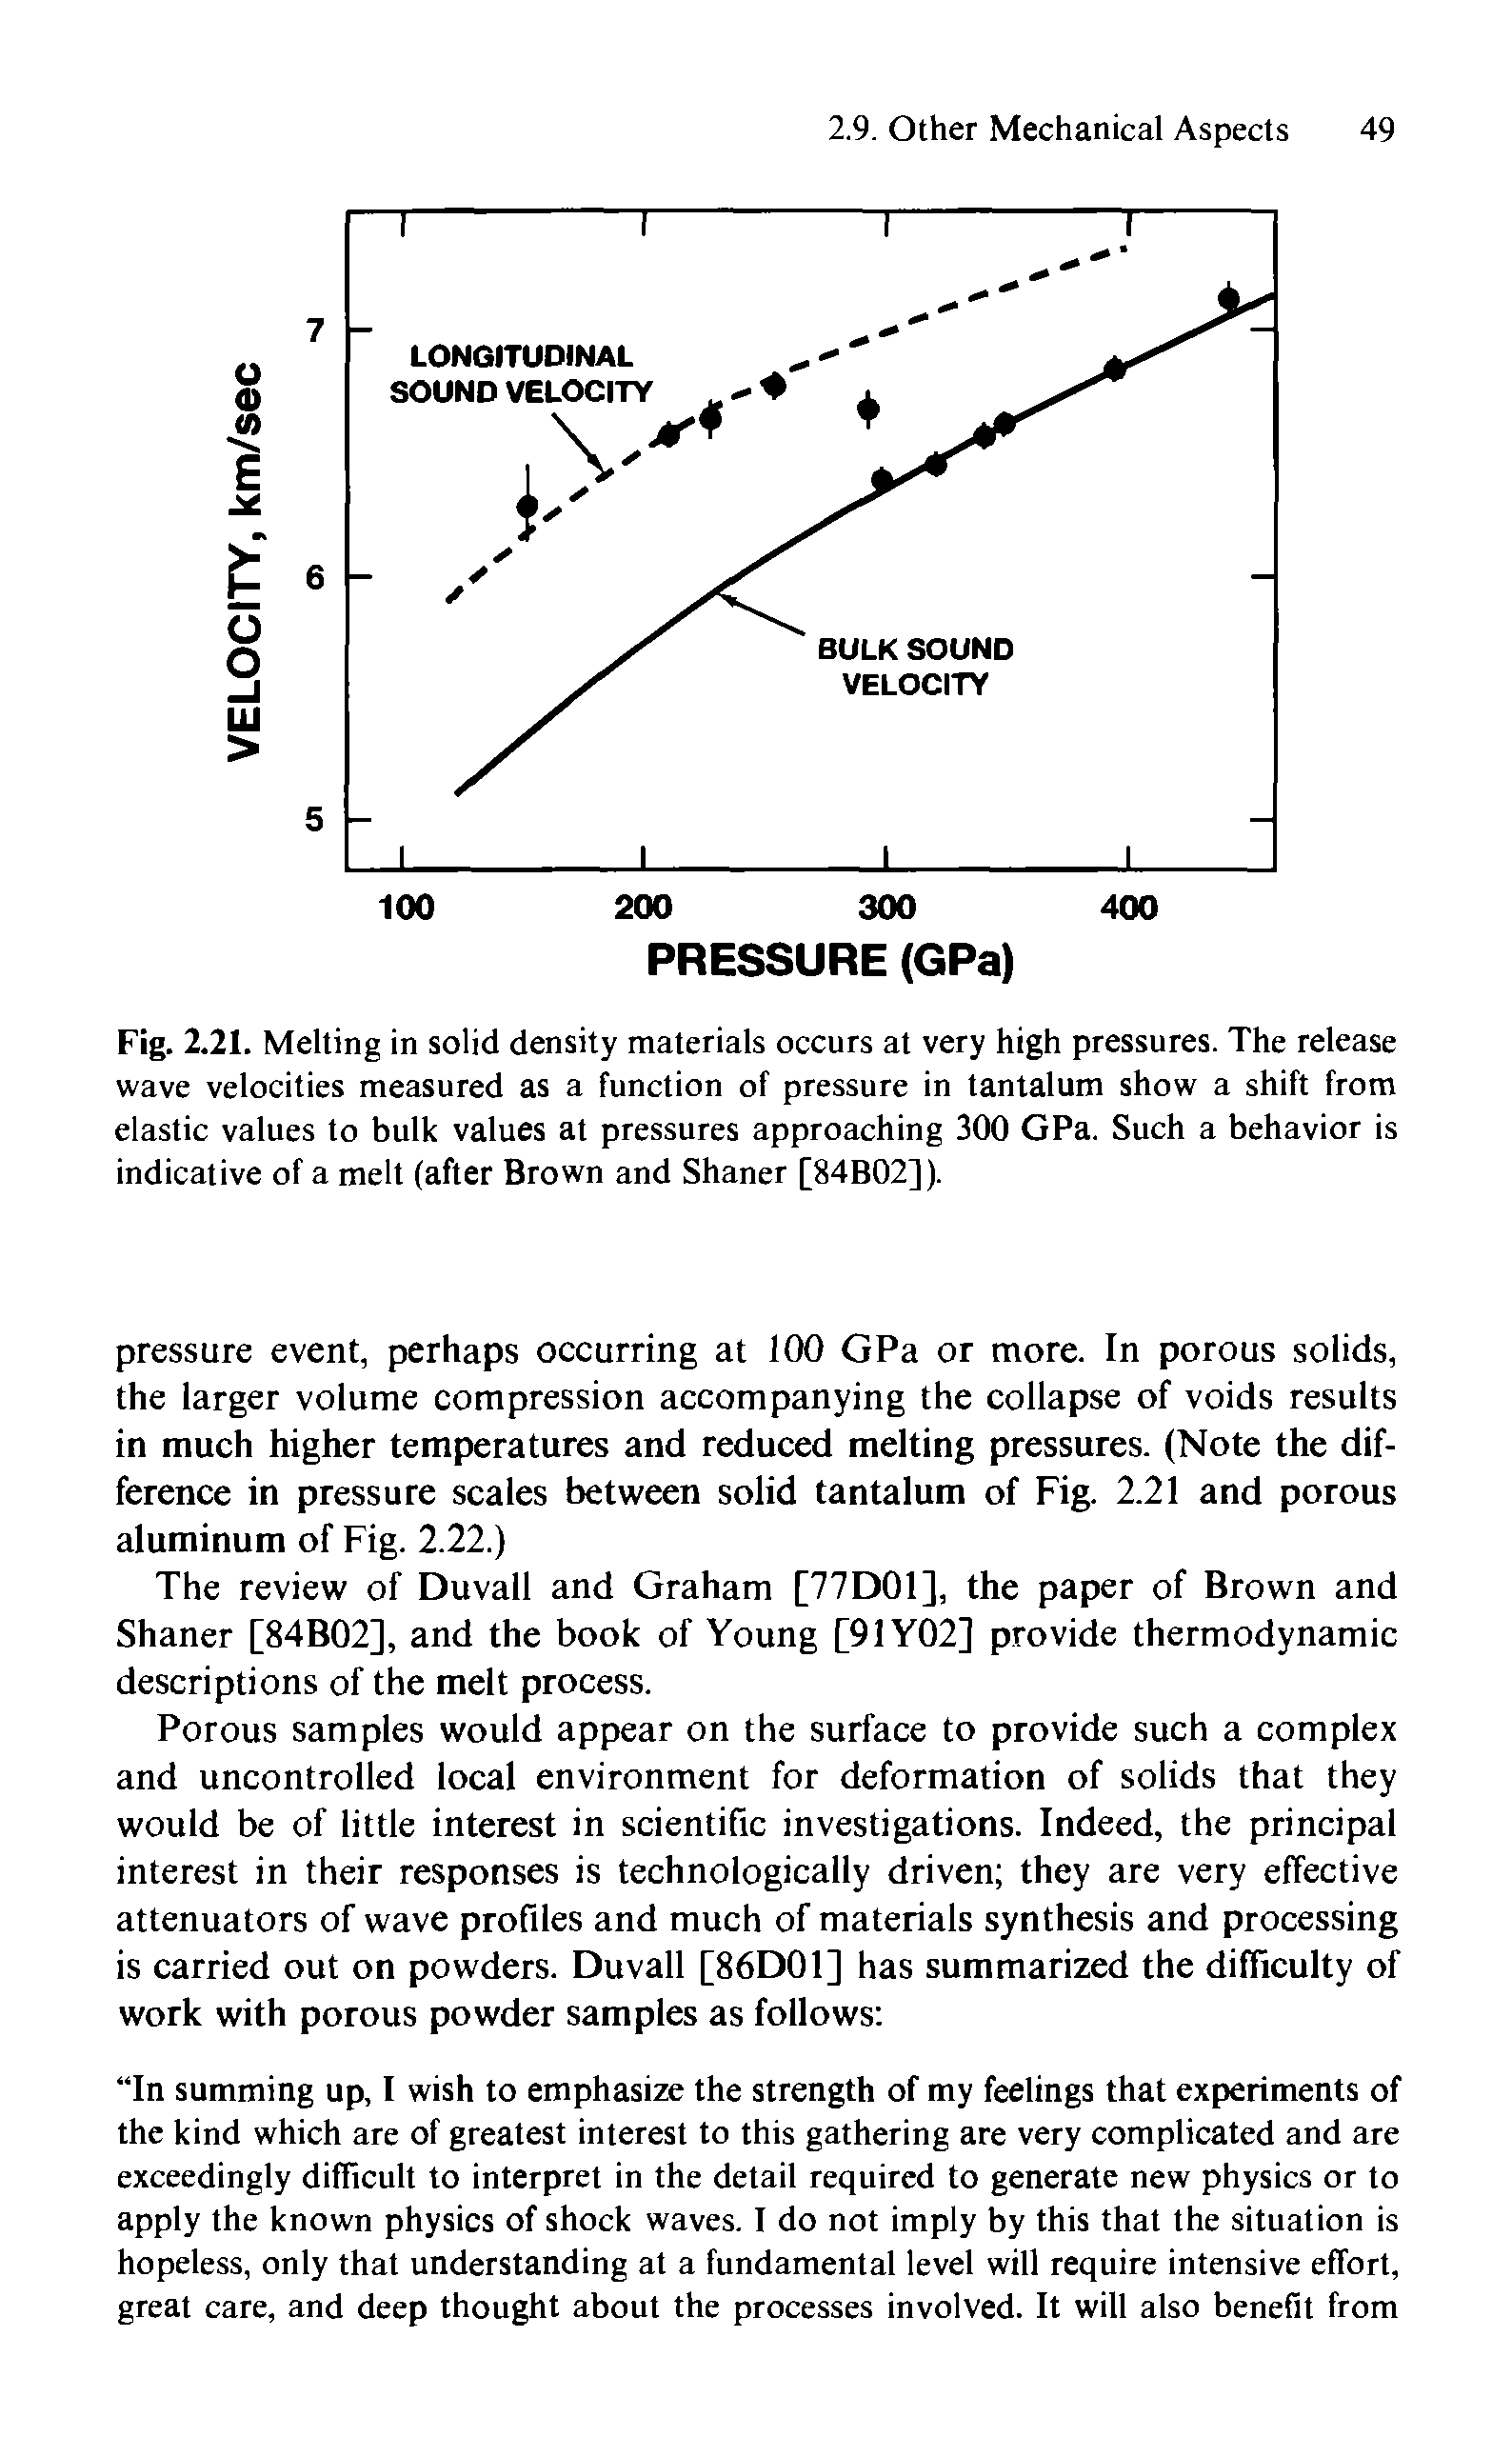 Fig. 2.21. Melting in solid density materials occurs at very high pressures. The release wave velocities measured as a function of pressure in tantalum show a shift from elastic values to bulk values at pressures approaching 300 GPa. Such a behavior is indicative of a melt (after Brown and Shaner [84B02]).